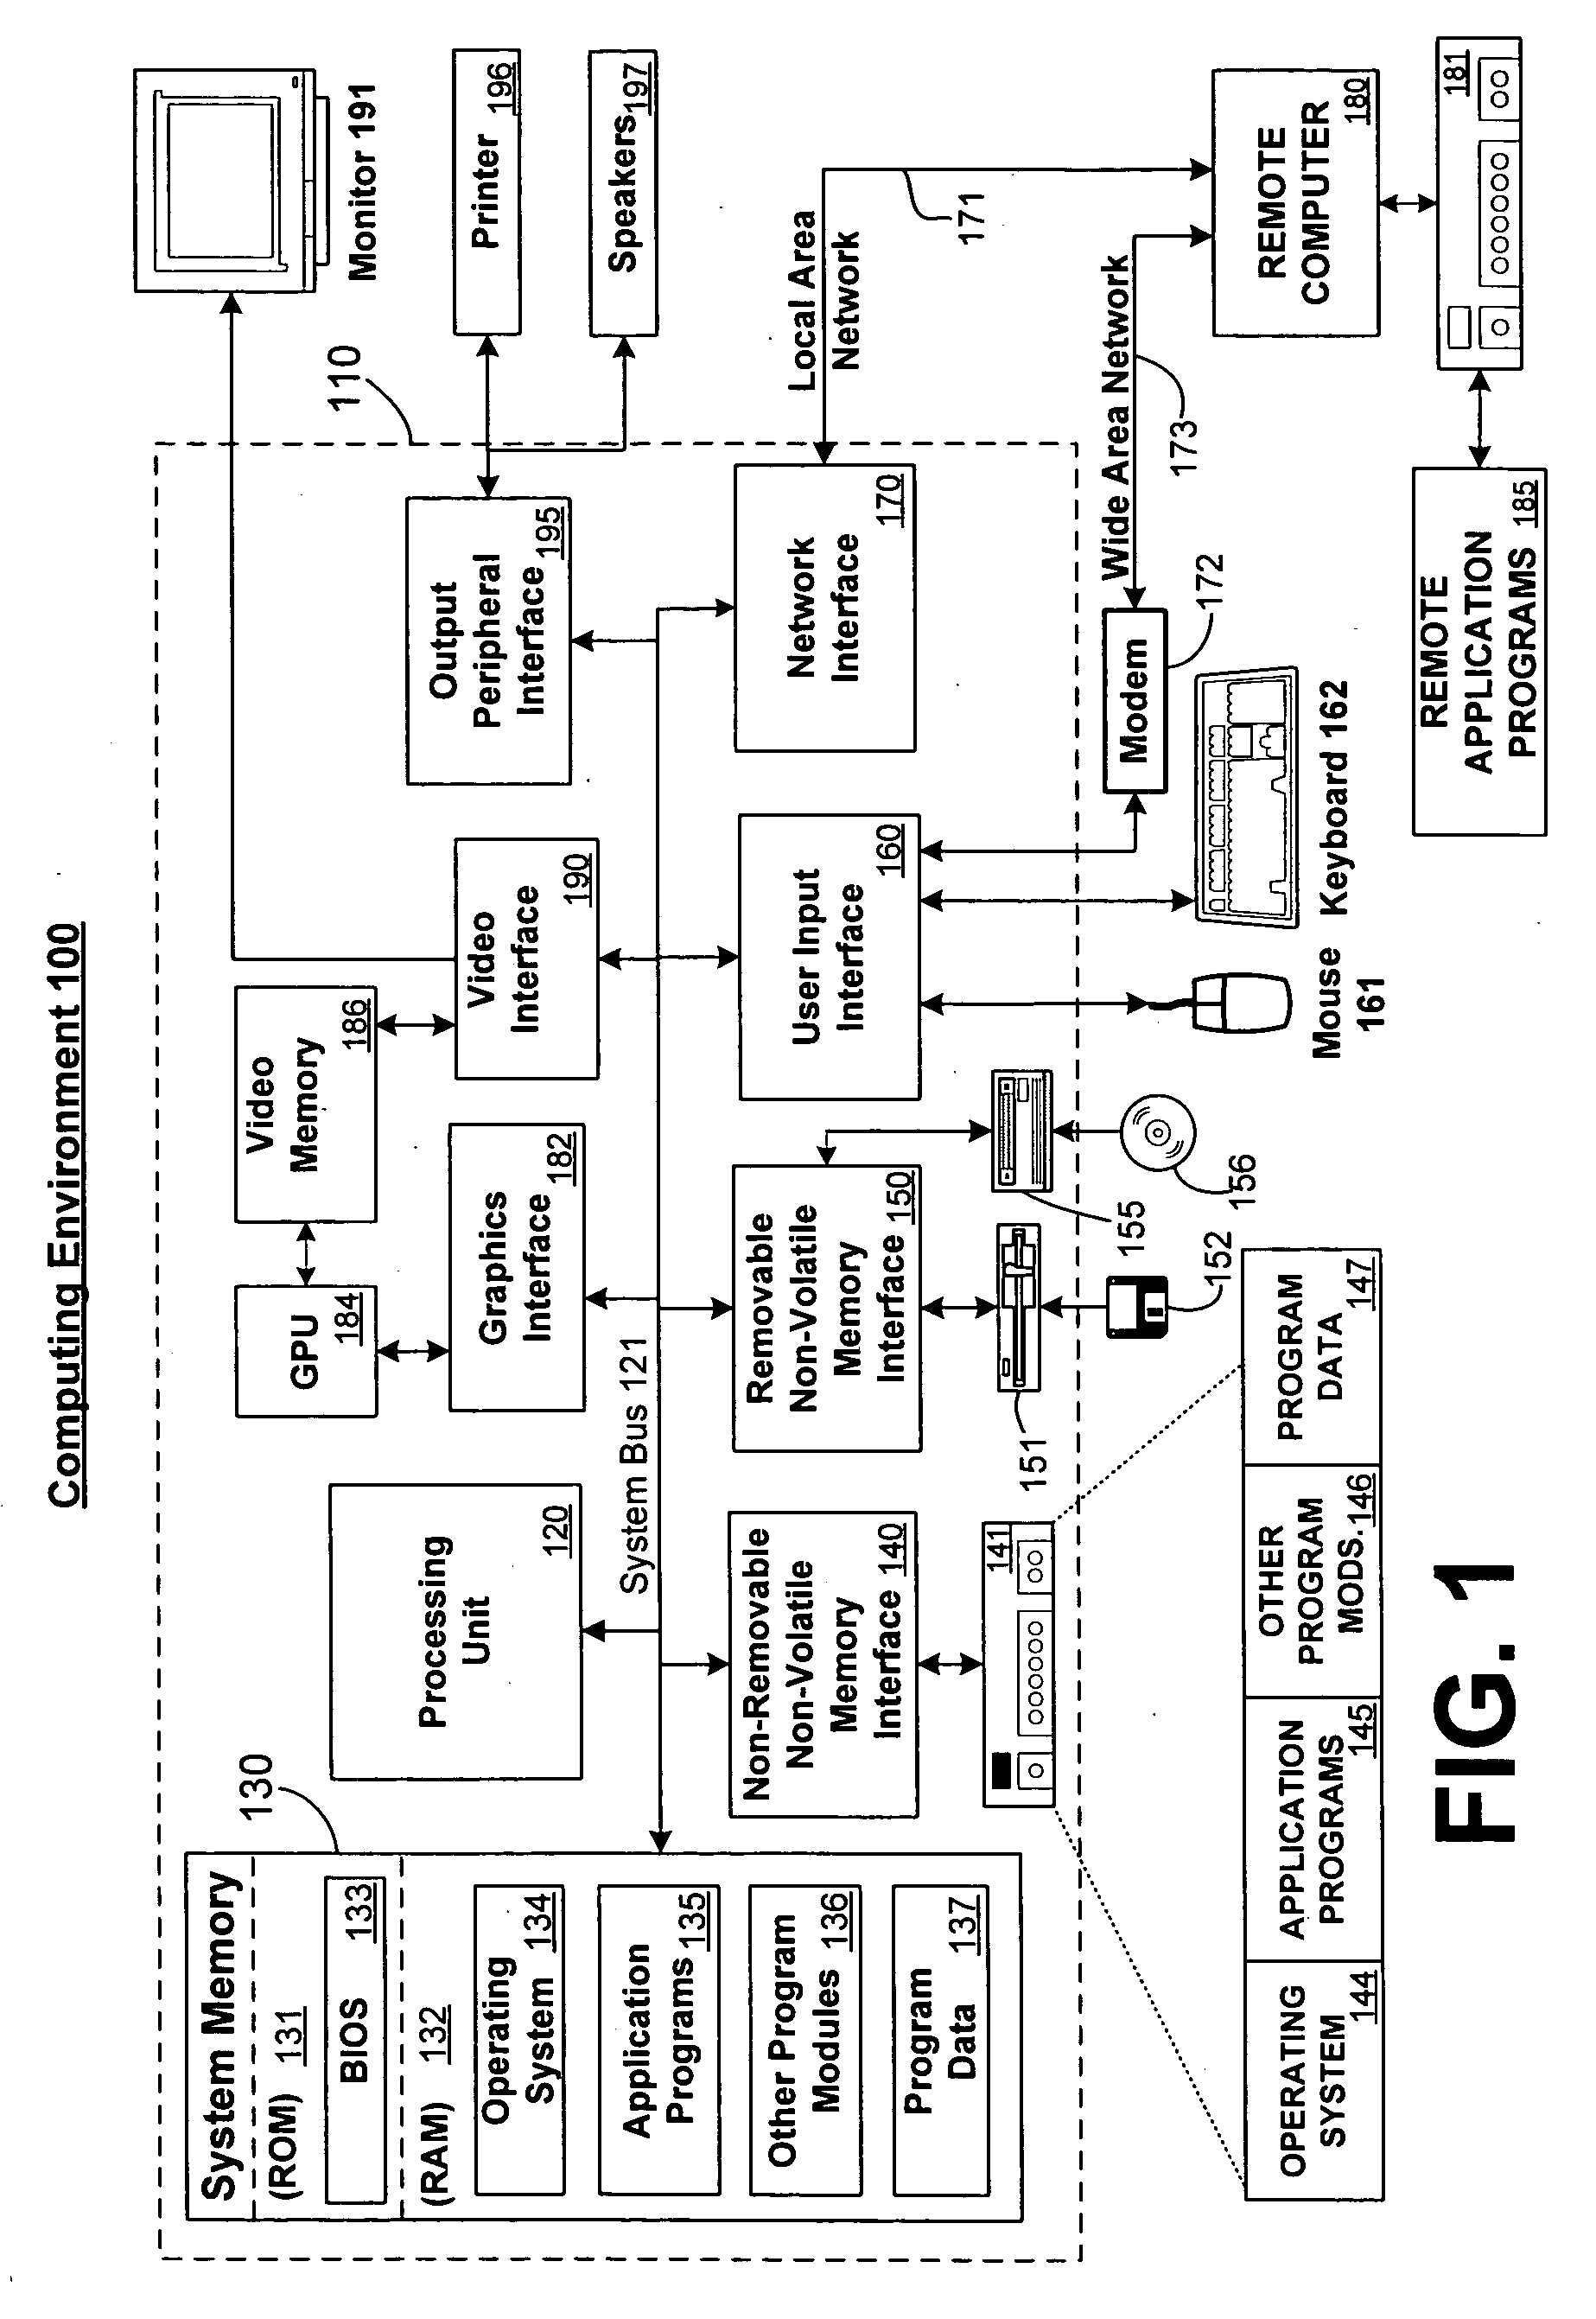 Providing information to an isolated hosted object via system-created variable objects